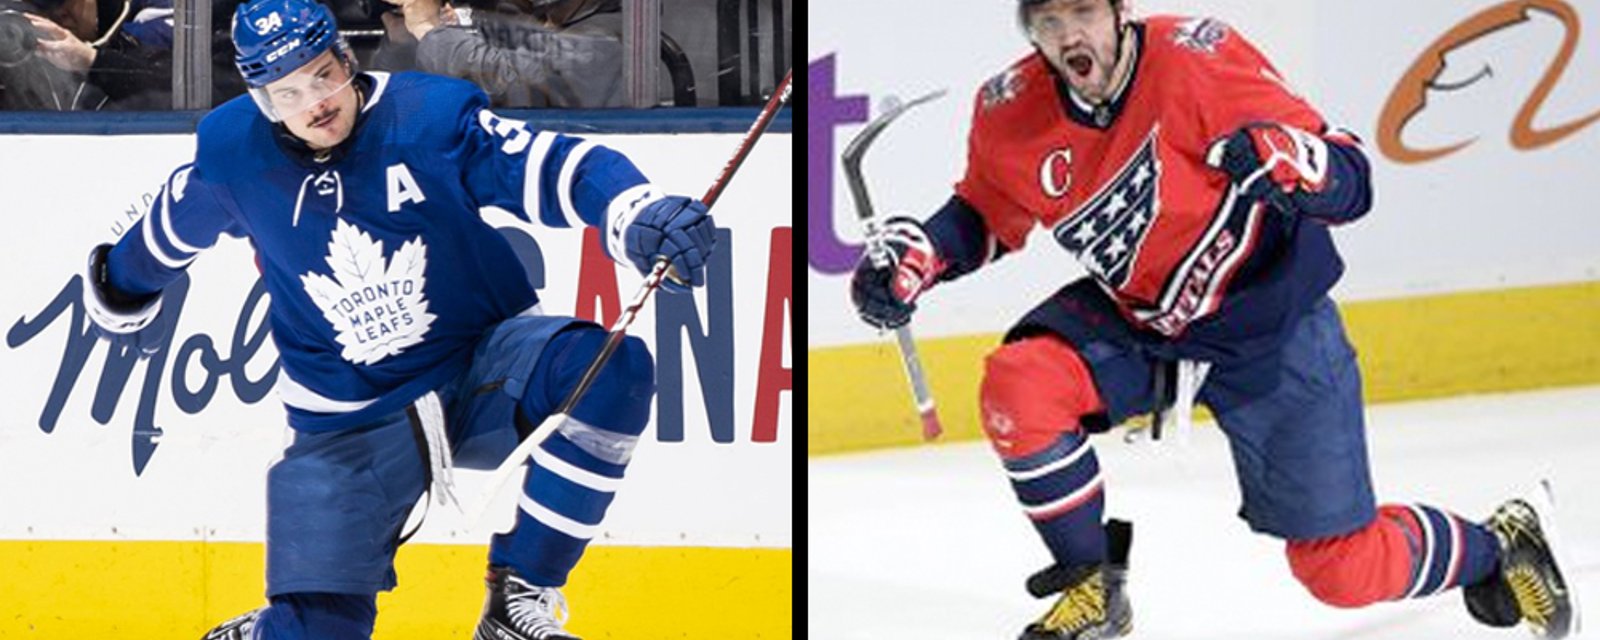 Poll of nearly 500 NHLers reveals who the players think is the world's best goal scorer